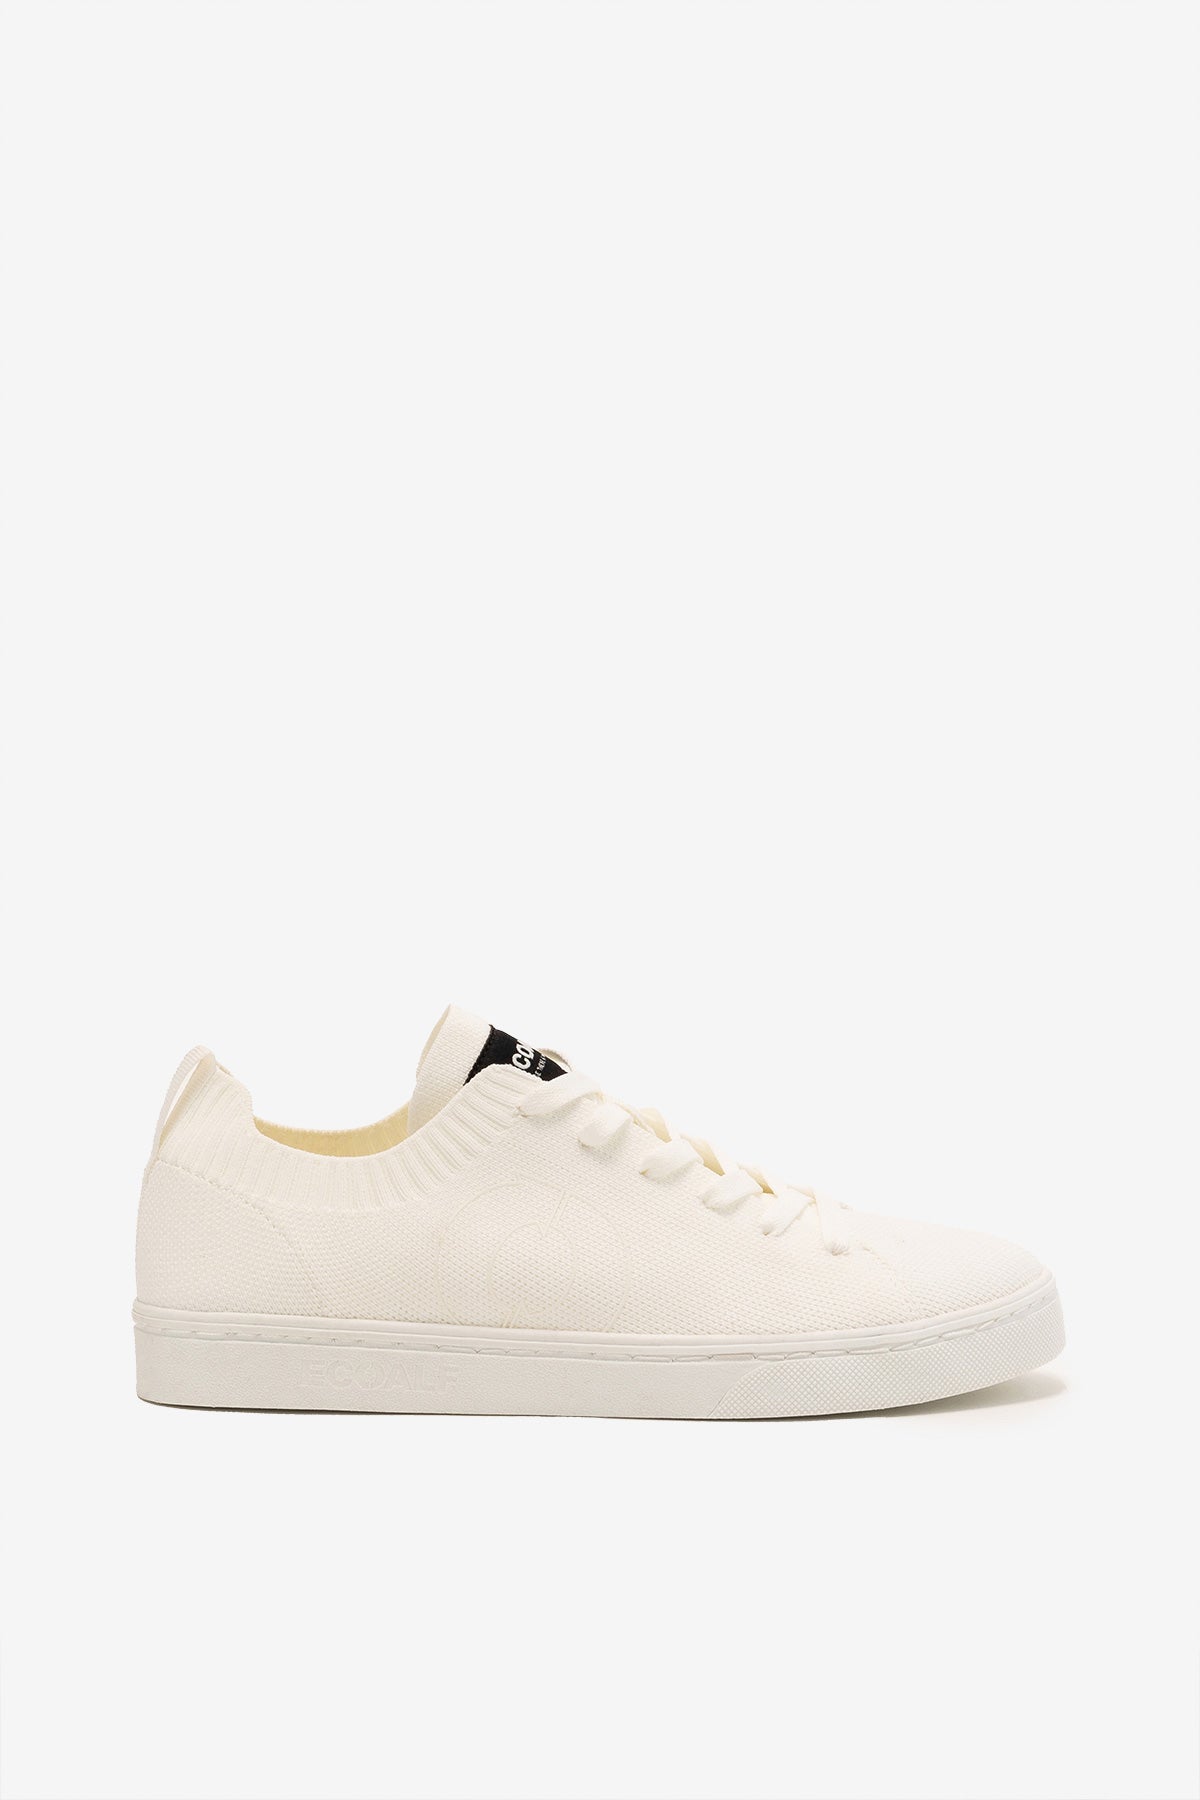 WHITE JERSEY TRAINERS